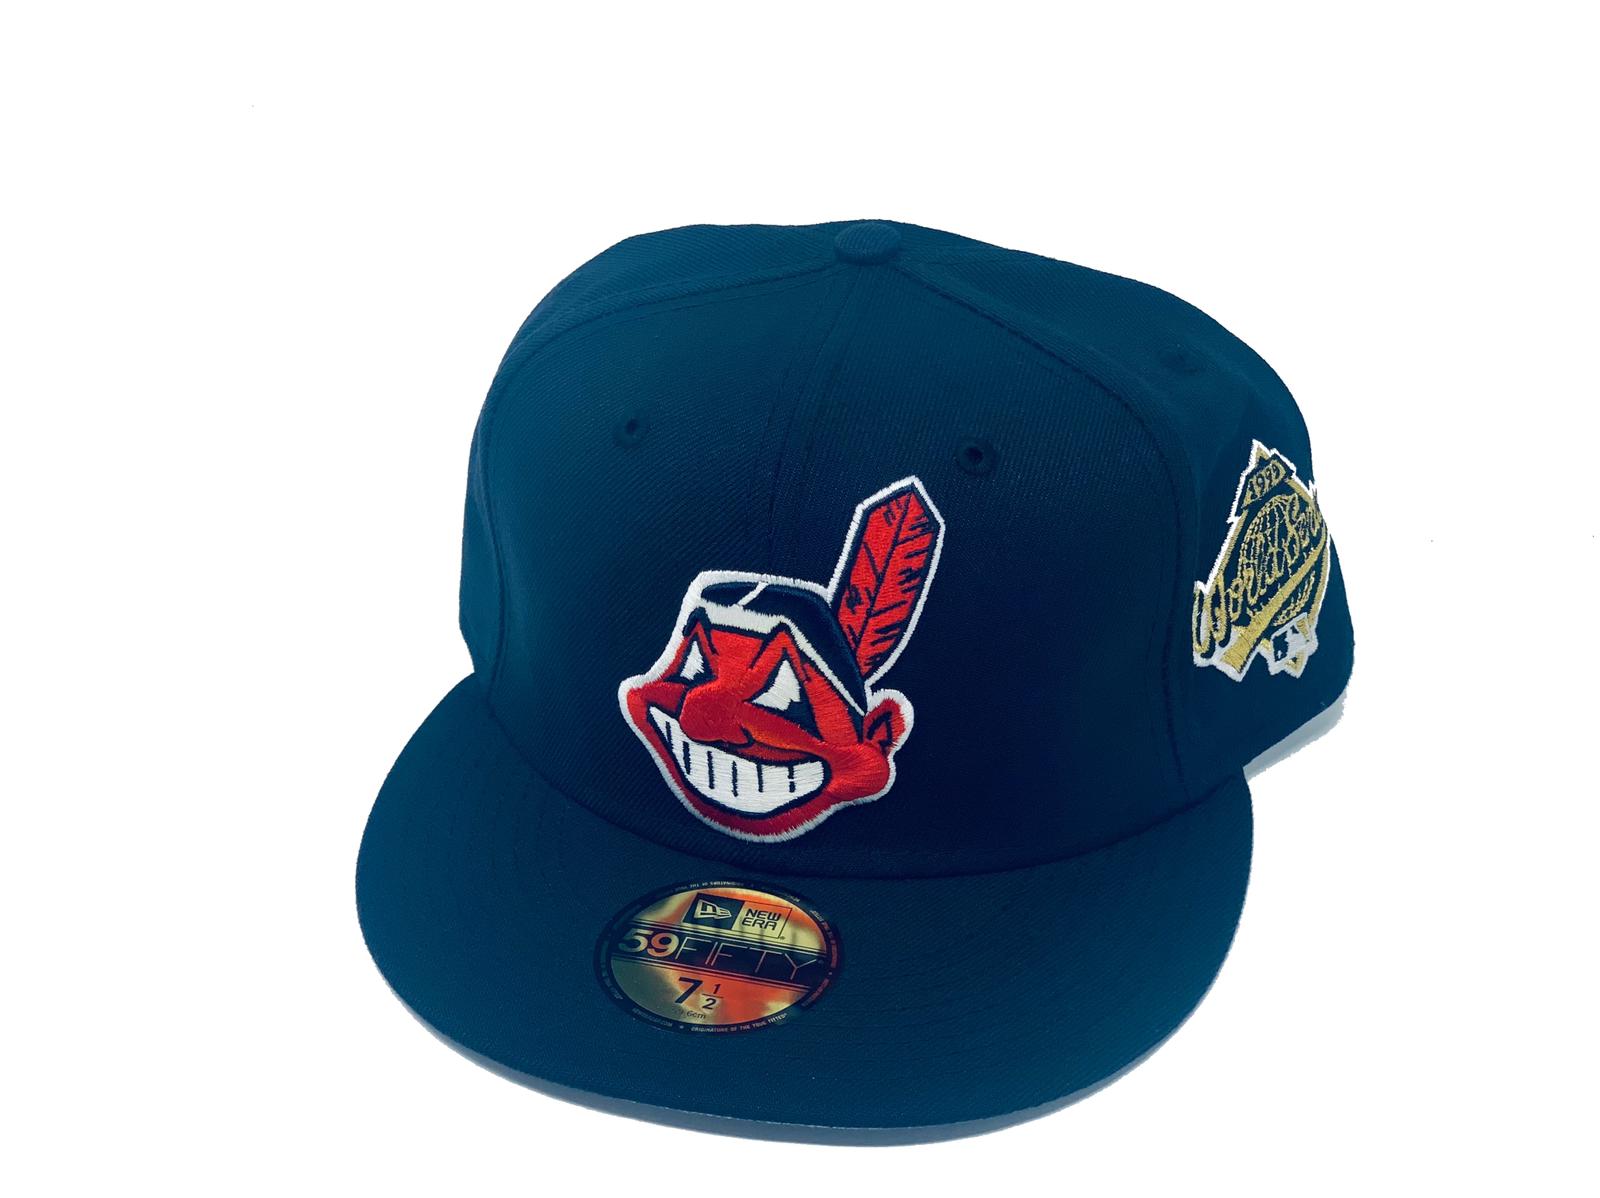 Cleveland Indians 1995 World Series 8 59Fifty New Era Hat Fitted Cap New Men